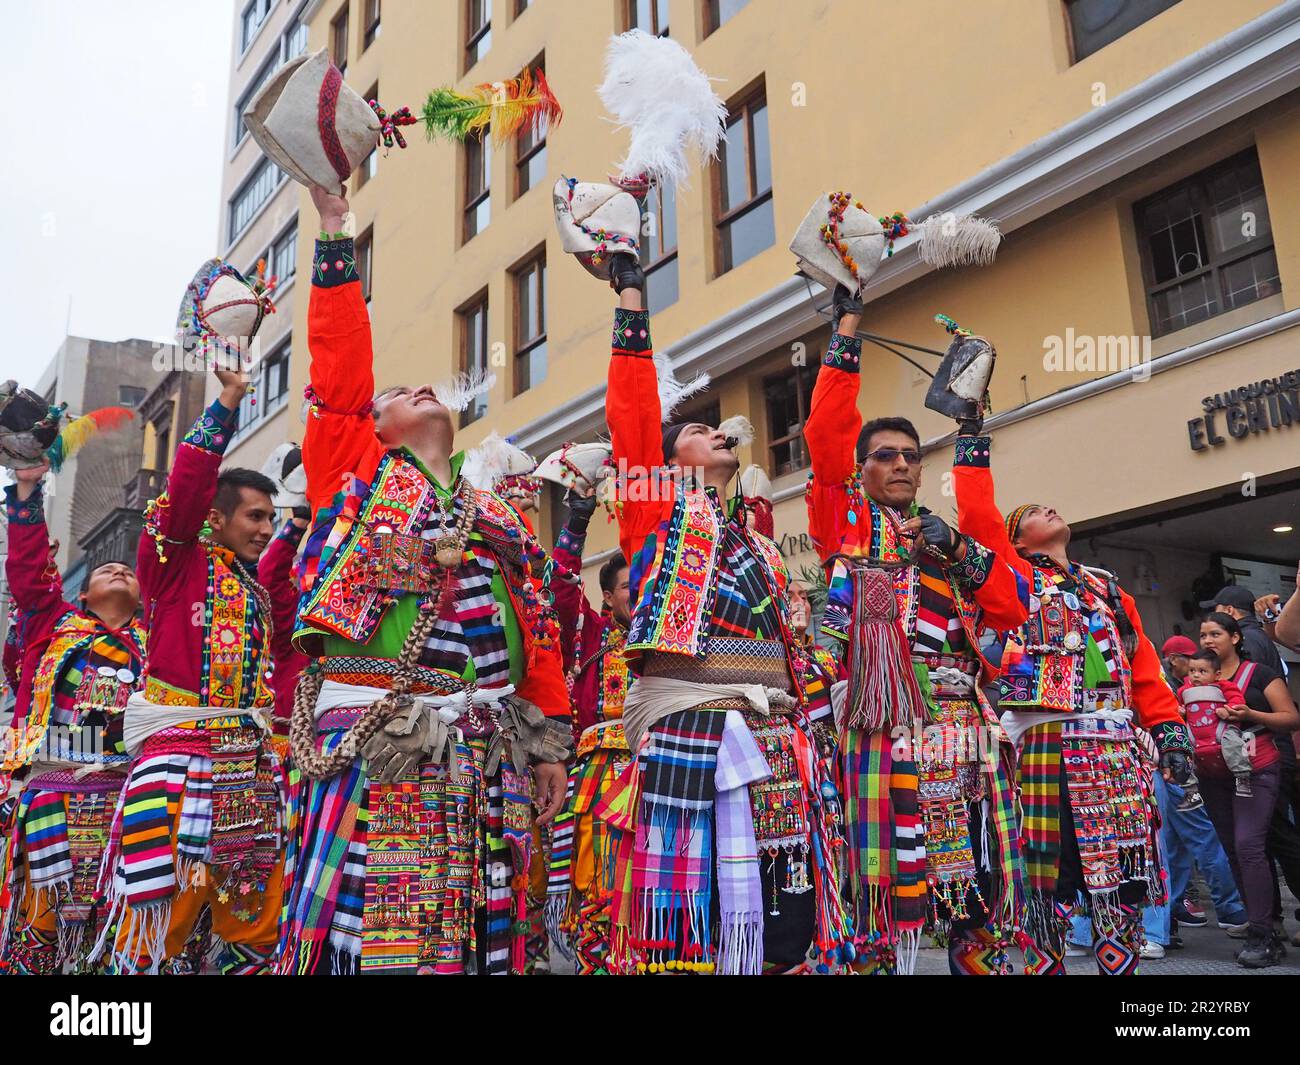 Lima, Peru. 21st May, 2023. Group of men performing when Peruvian Indigenous folk dancers wearing traditional costumes from the Andean regions took to the streets of Lima downtown again, as they used to do every Sunday before the pandemic, to spread their colorful dances and ancestral traditions. Credit: Fotoholica Press Agency/Alamy Live News Stock Photo